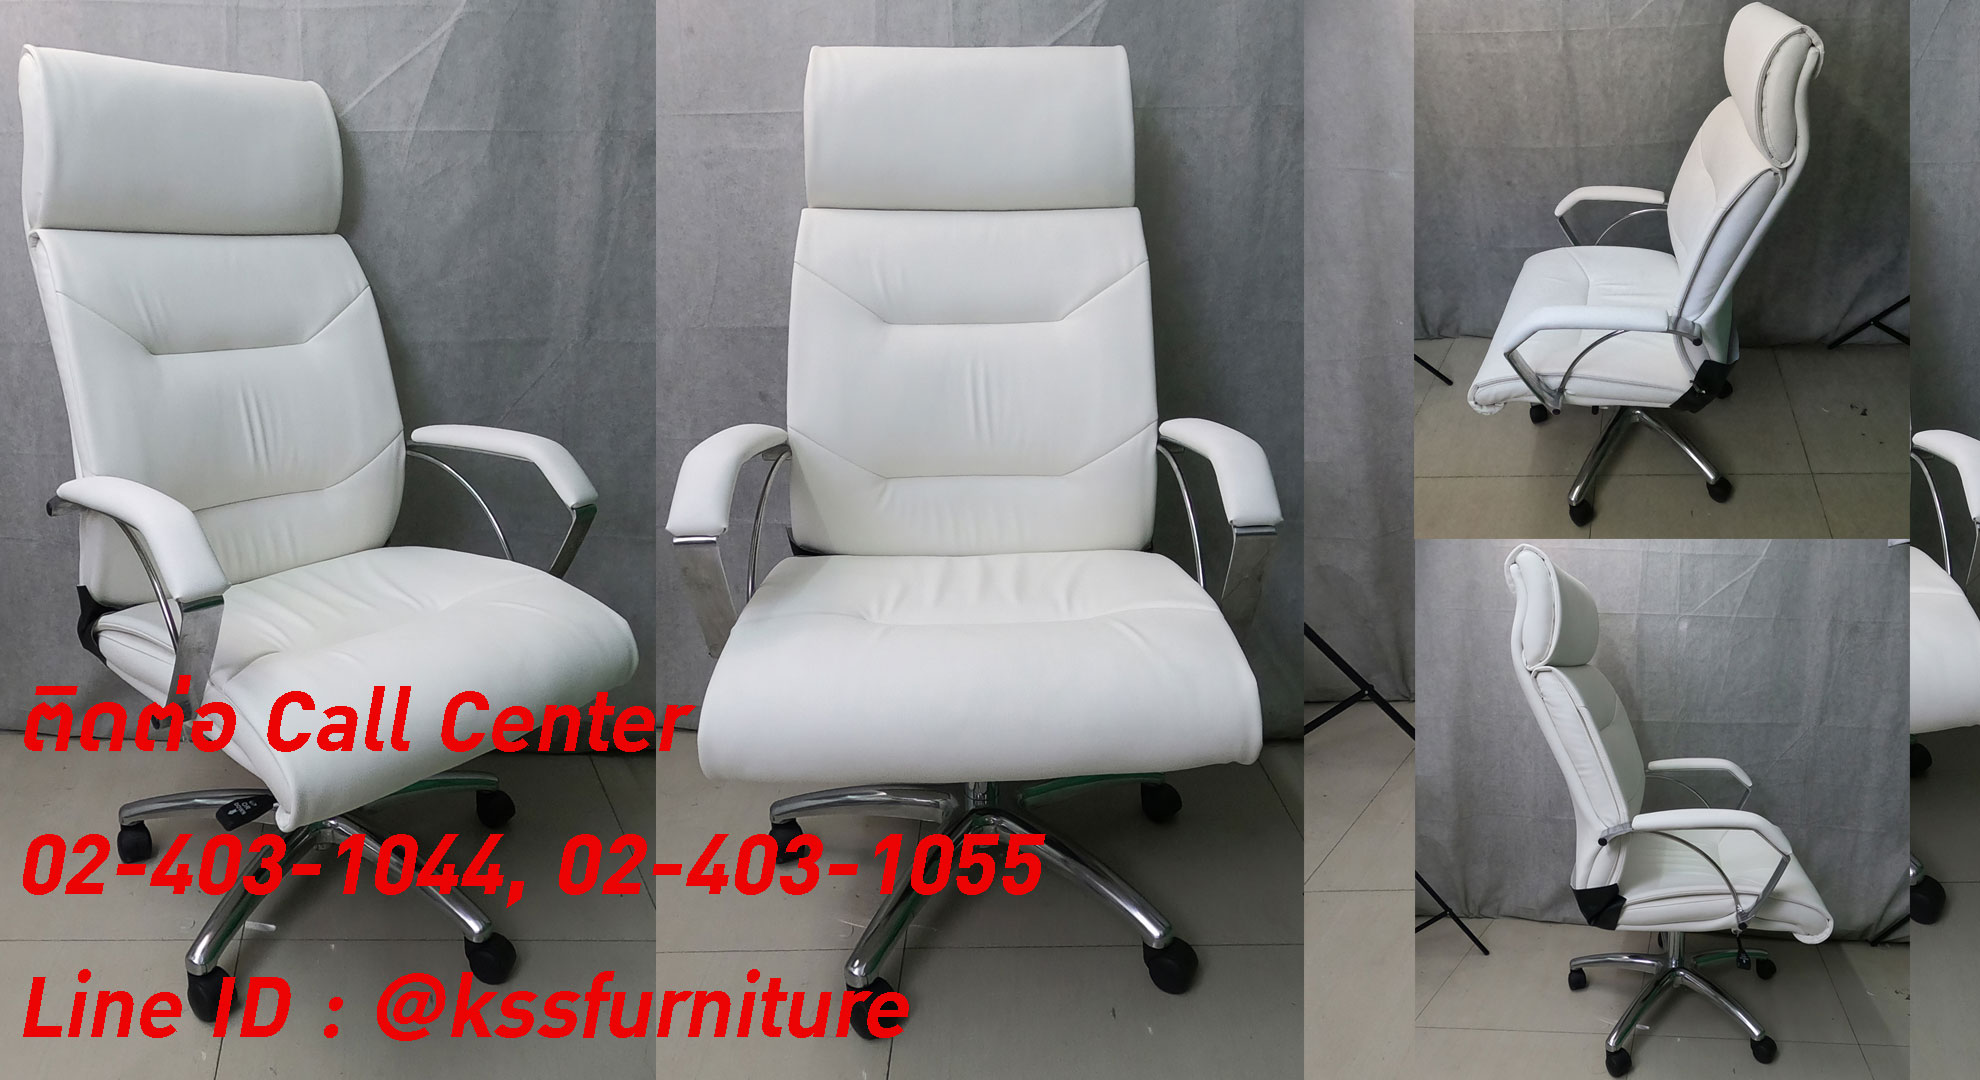 64041::CNR-149H::A CNR executive chair with PU/PVC/genuine leather seat and aluminium base. Dimension (WxDxH) cm :63x70x118-124